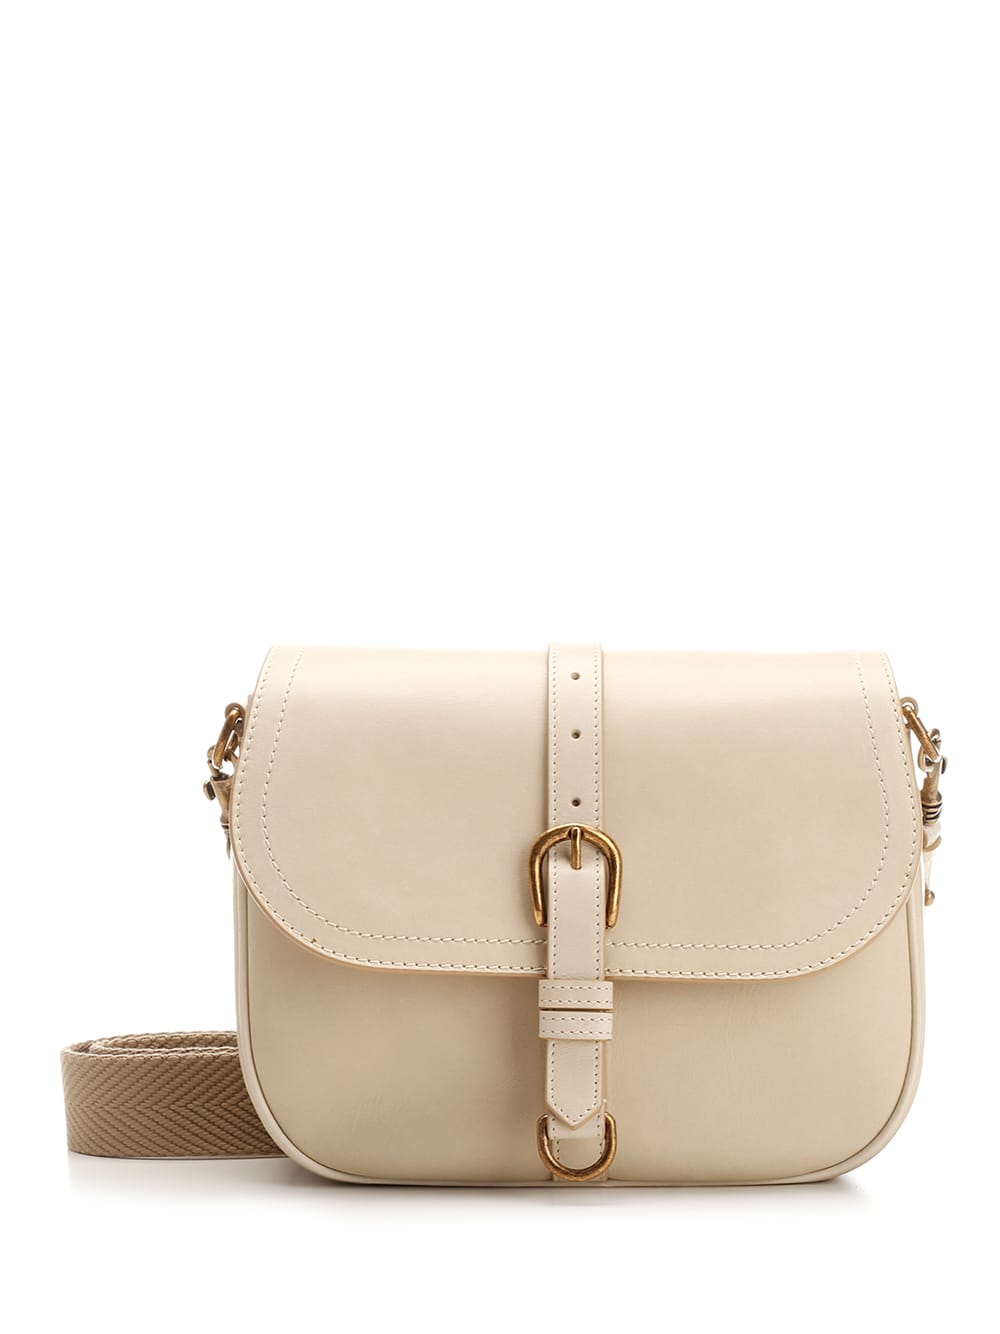 Golden Goose Sally Leather Bag